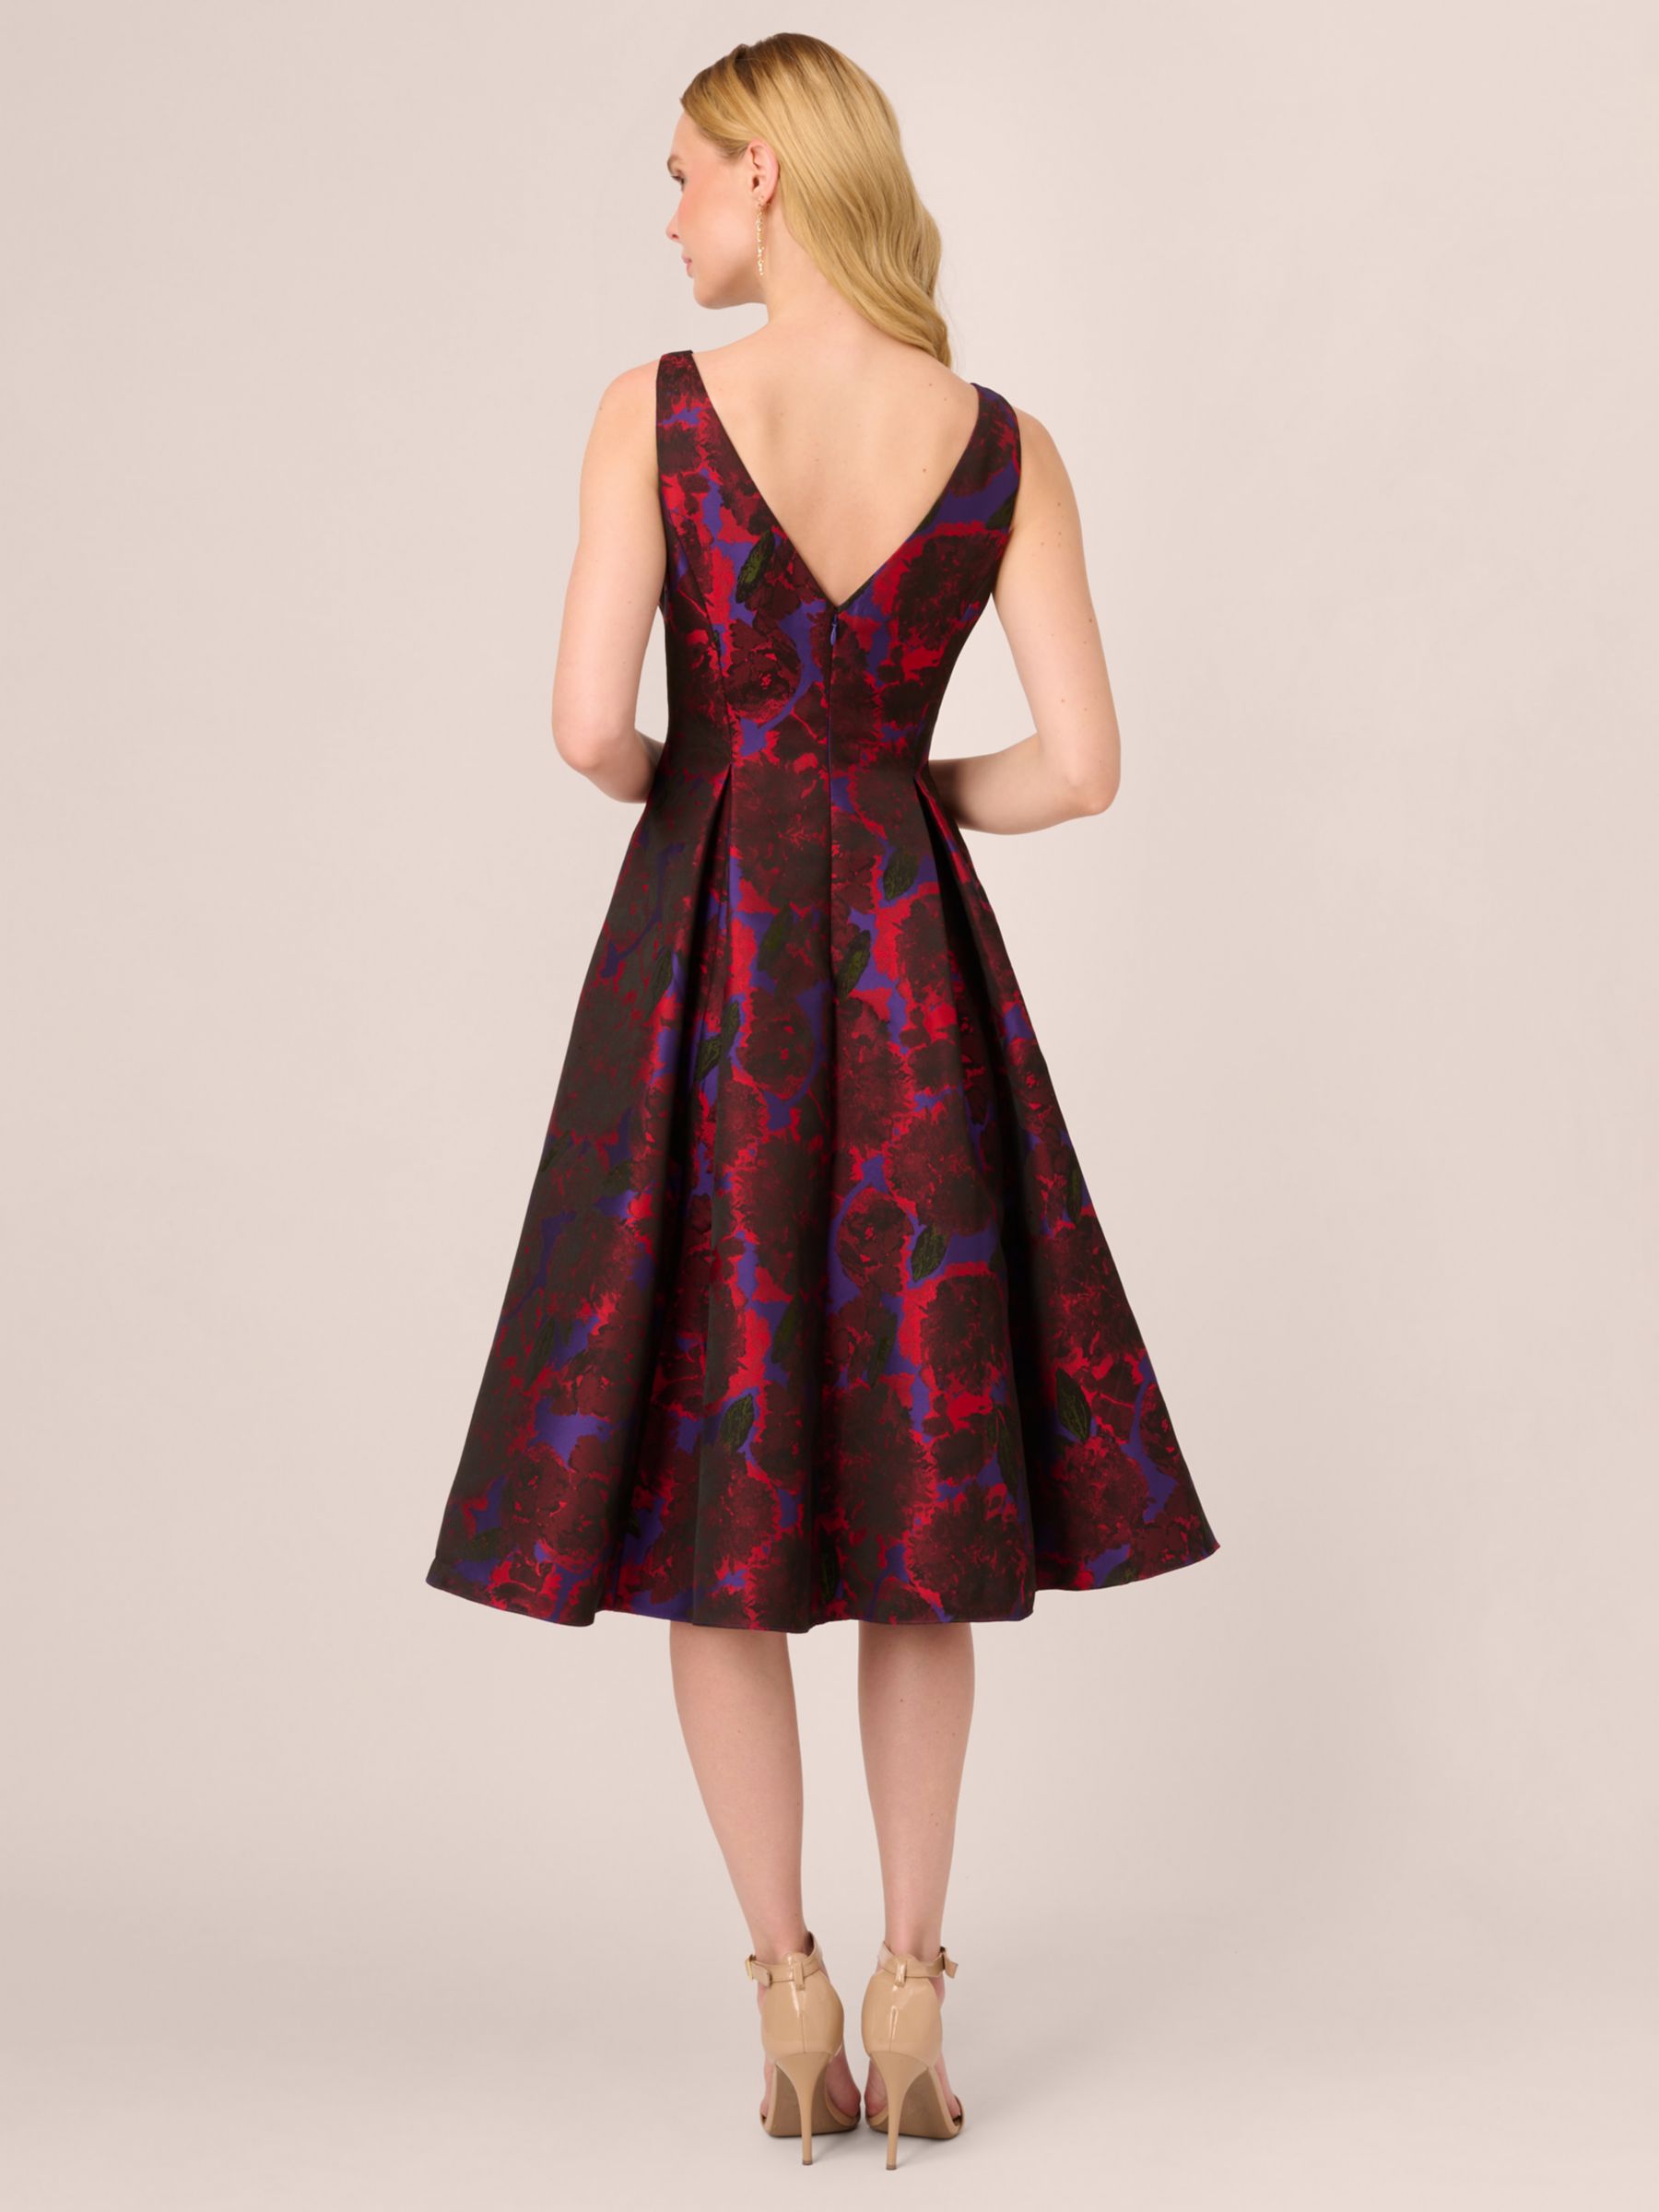 Buy Adrianna Papell Jacquard Tea Dress, Red/Multi Online at johnlewis.com